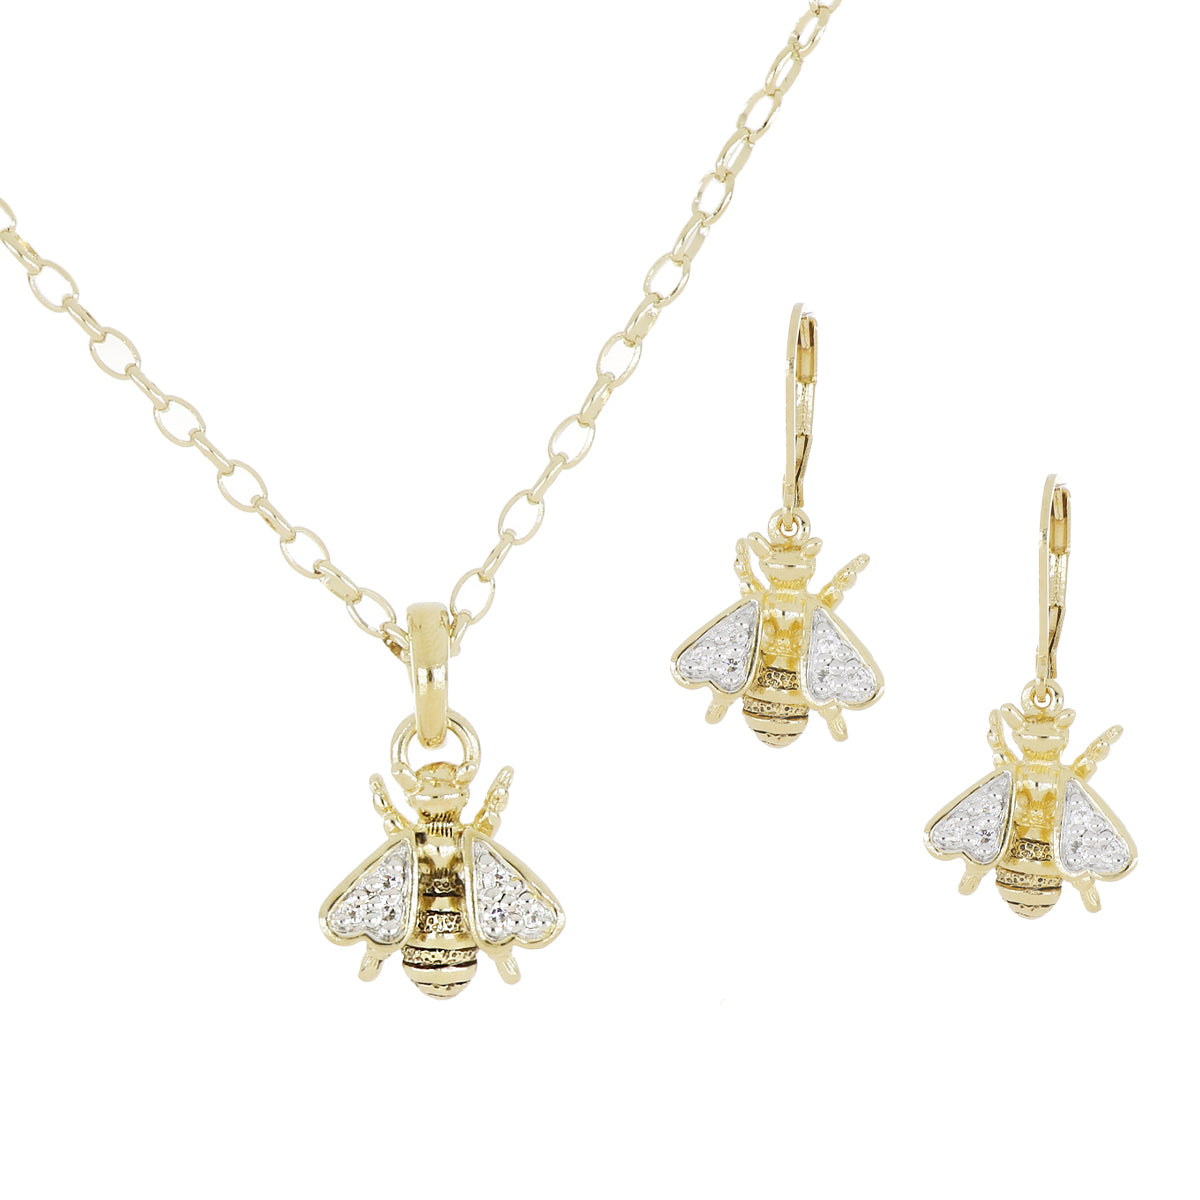 20th Anniversary Queen Bee Pendant Necklace & Earring Gift Set